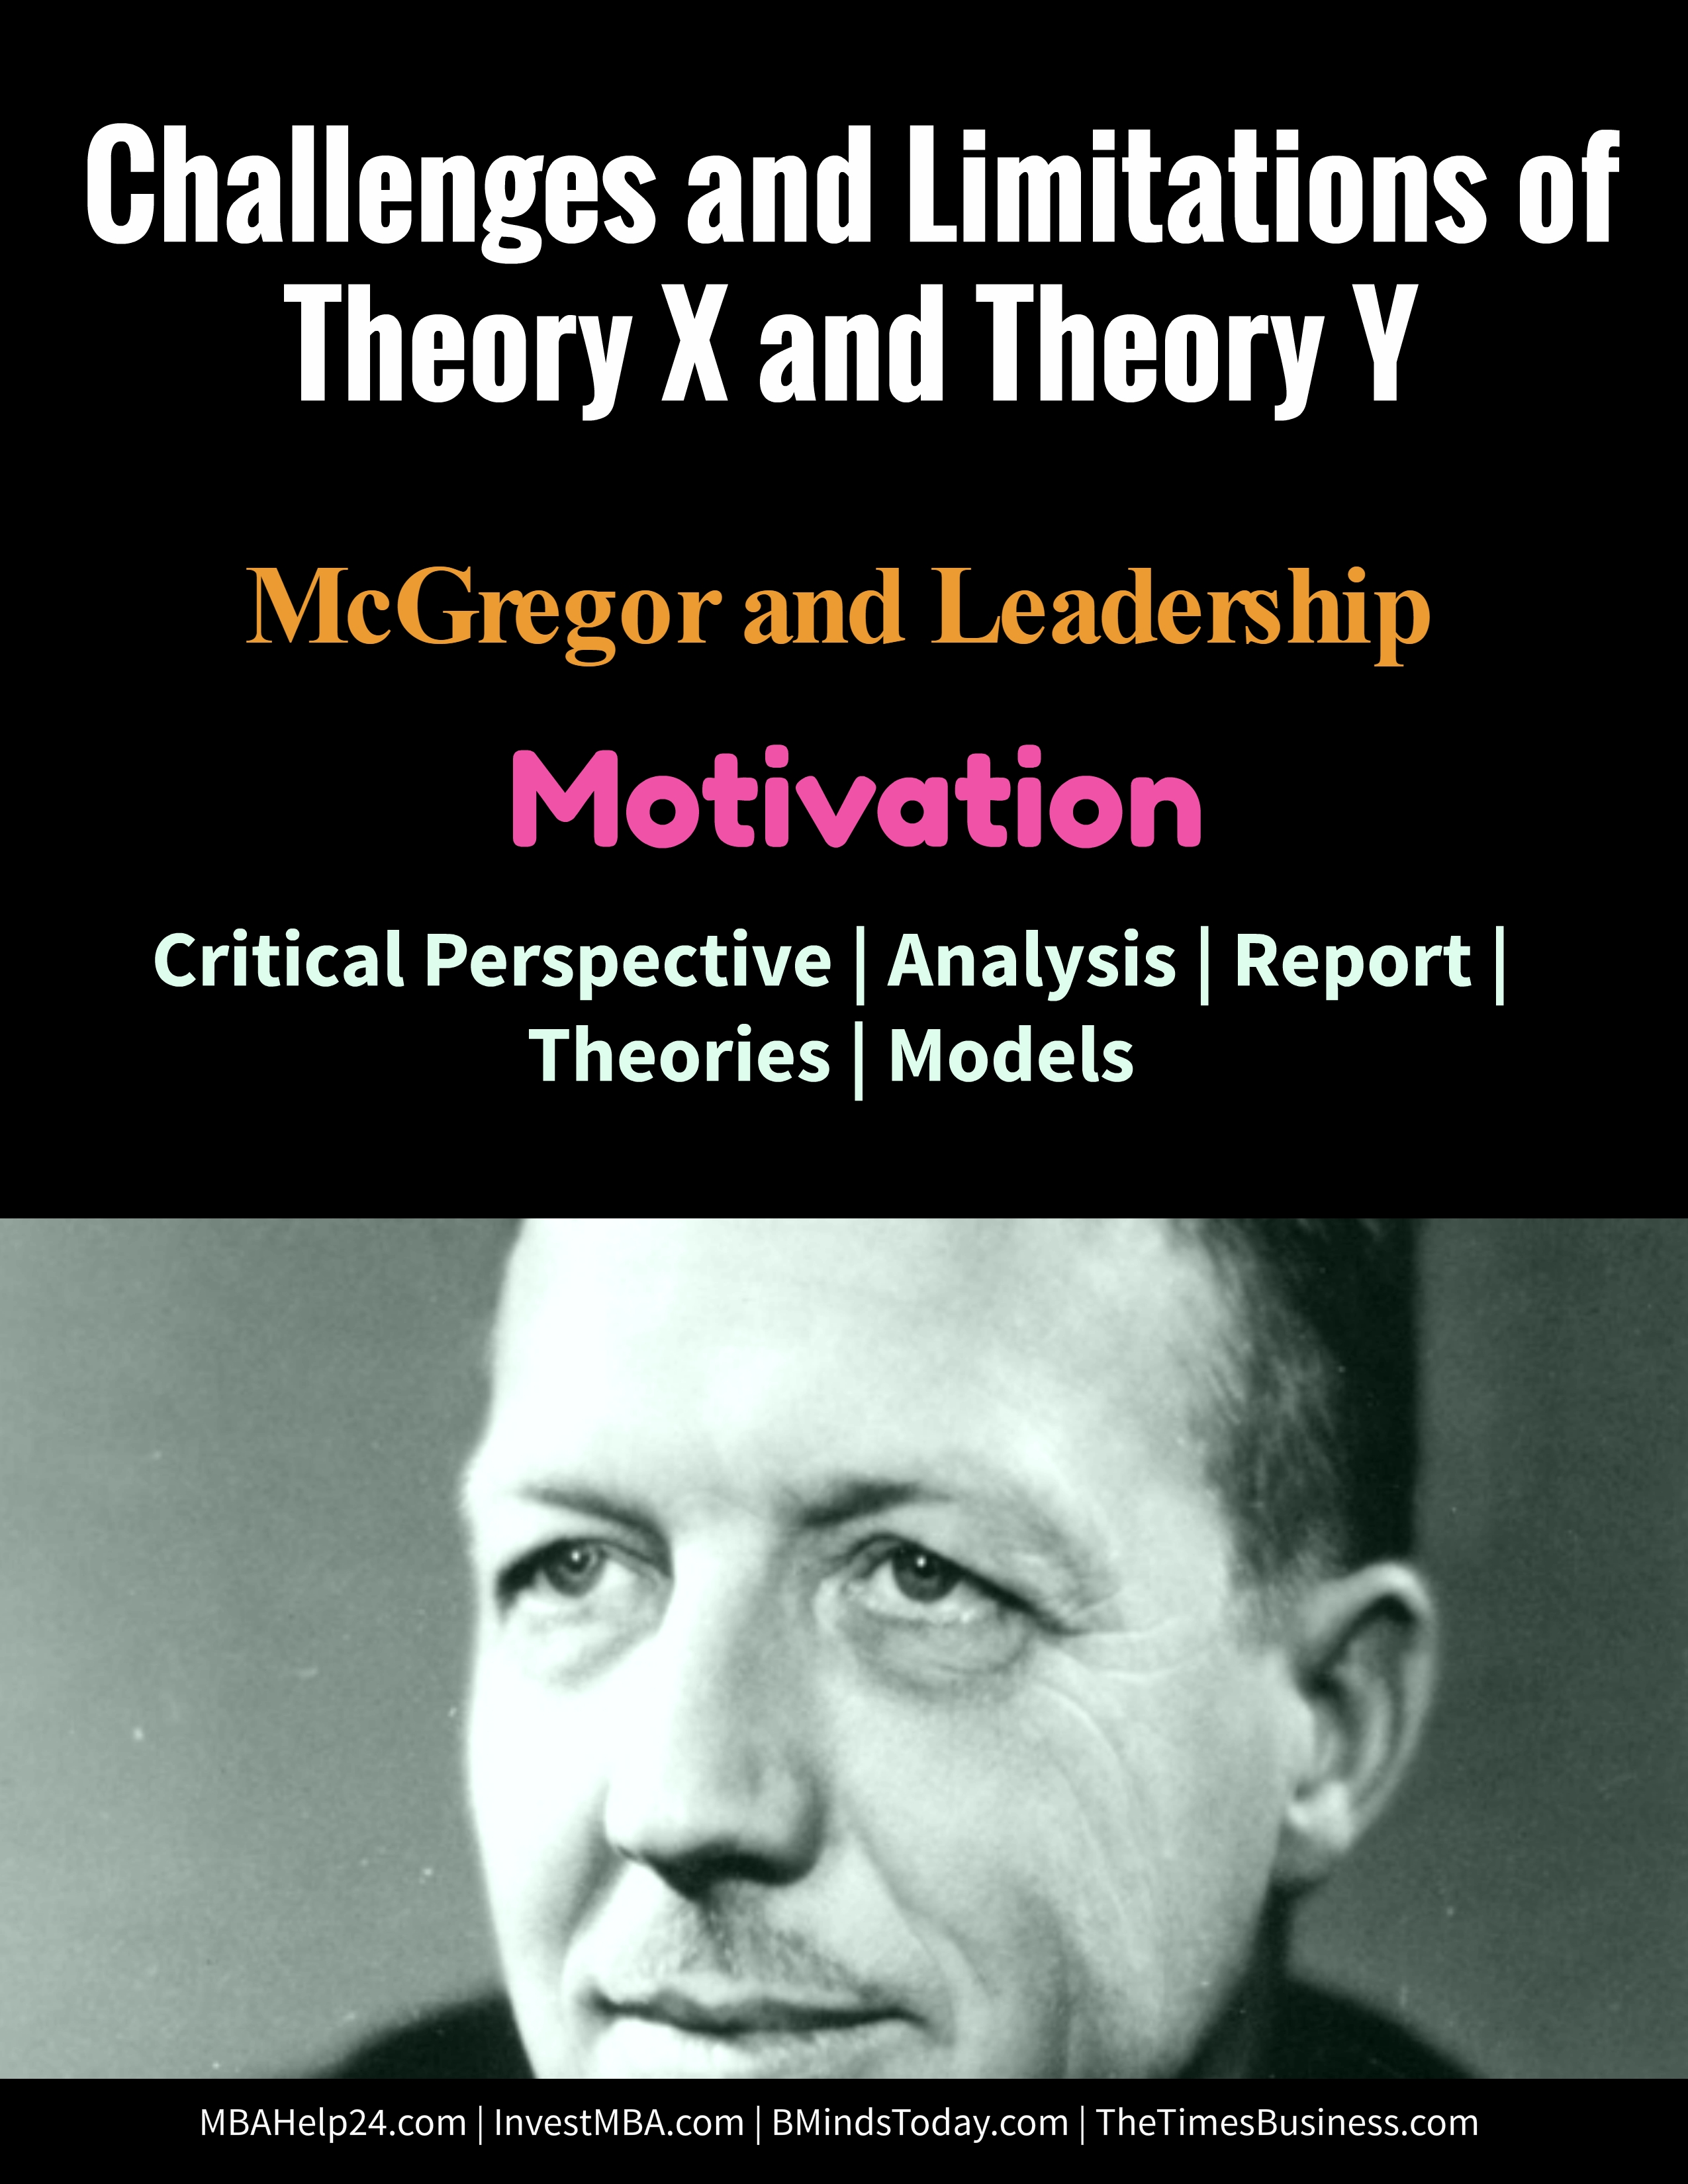 Challenges and Limitations of Theory X and Theory Y | Motivation Theory X and Theory Y Challenges and Limitations of Theory X and Theory Y | Motivation limitations of mc gregor theory x and theory y Challenges and Limitations of Theory X and Theory Y Challenges and Limitations of Theory X and Theory Y limitations of mc gregor theory x and theory y